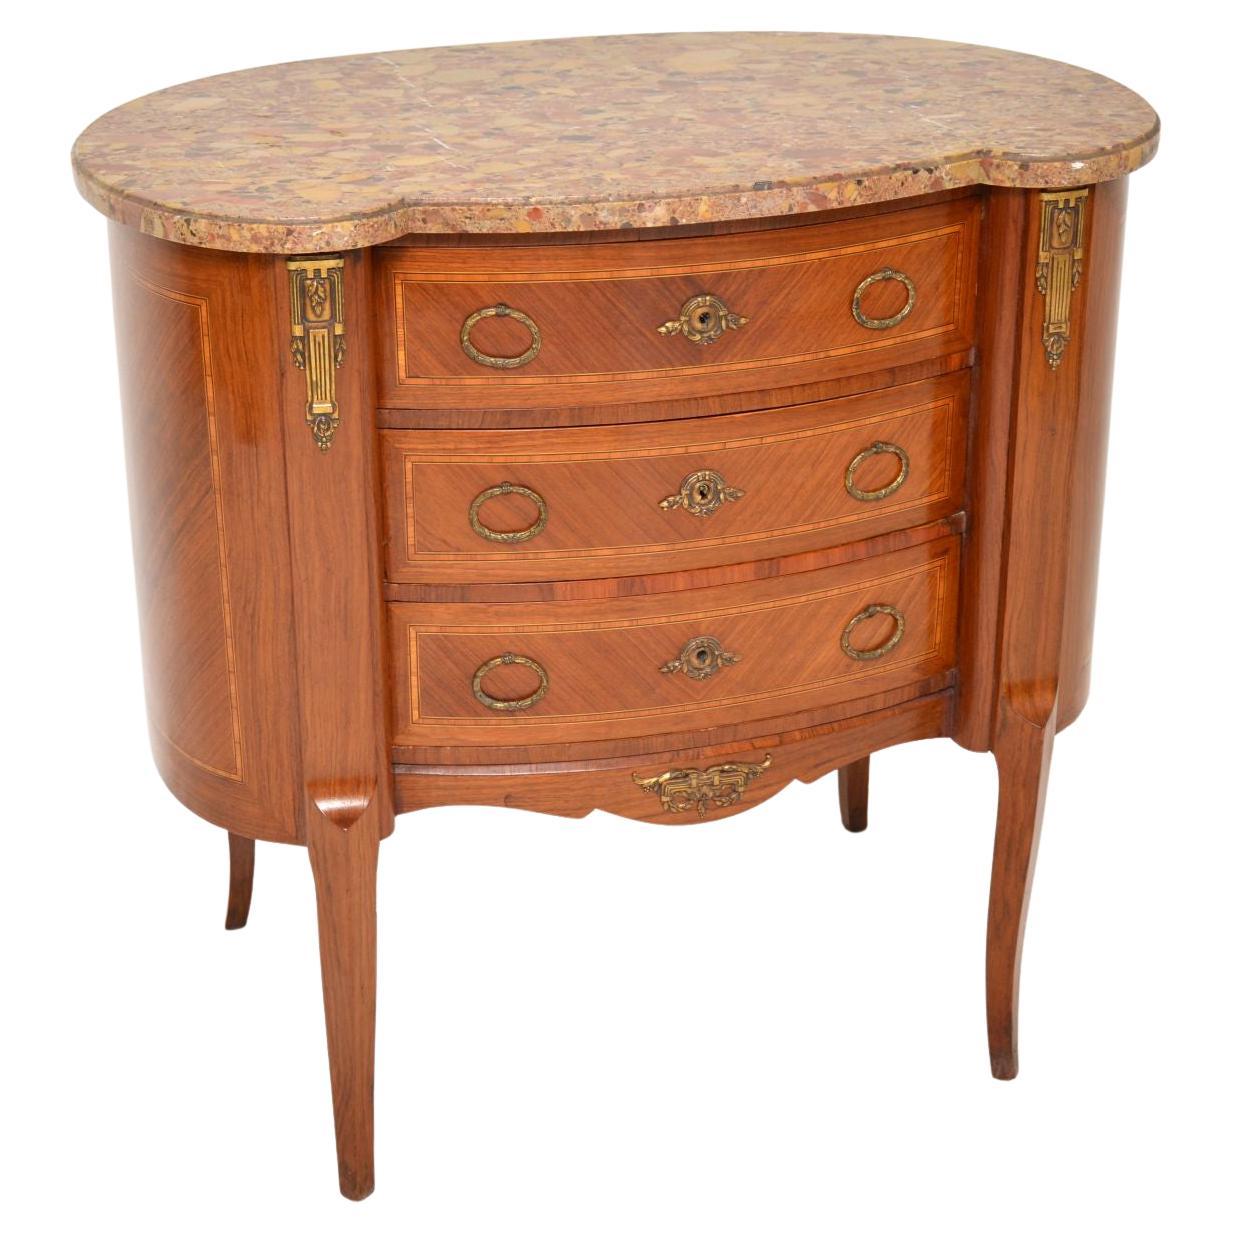 Antique French Inlaid Wood Marble Top Commode